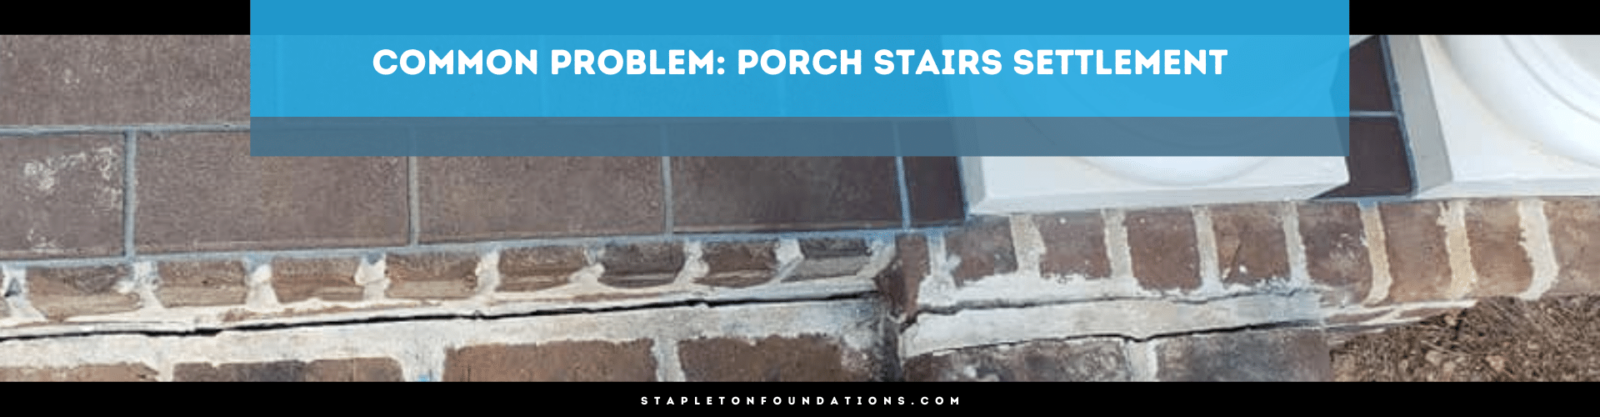 Porch stairs settlement is a common foundation problem